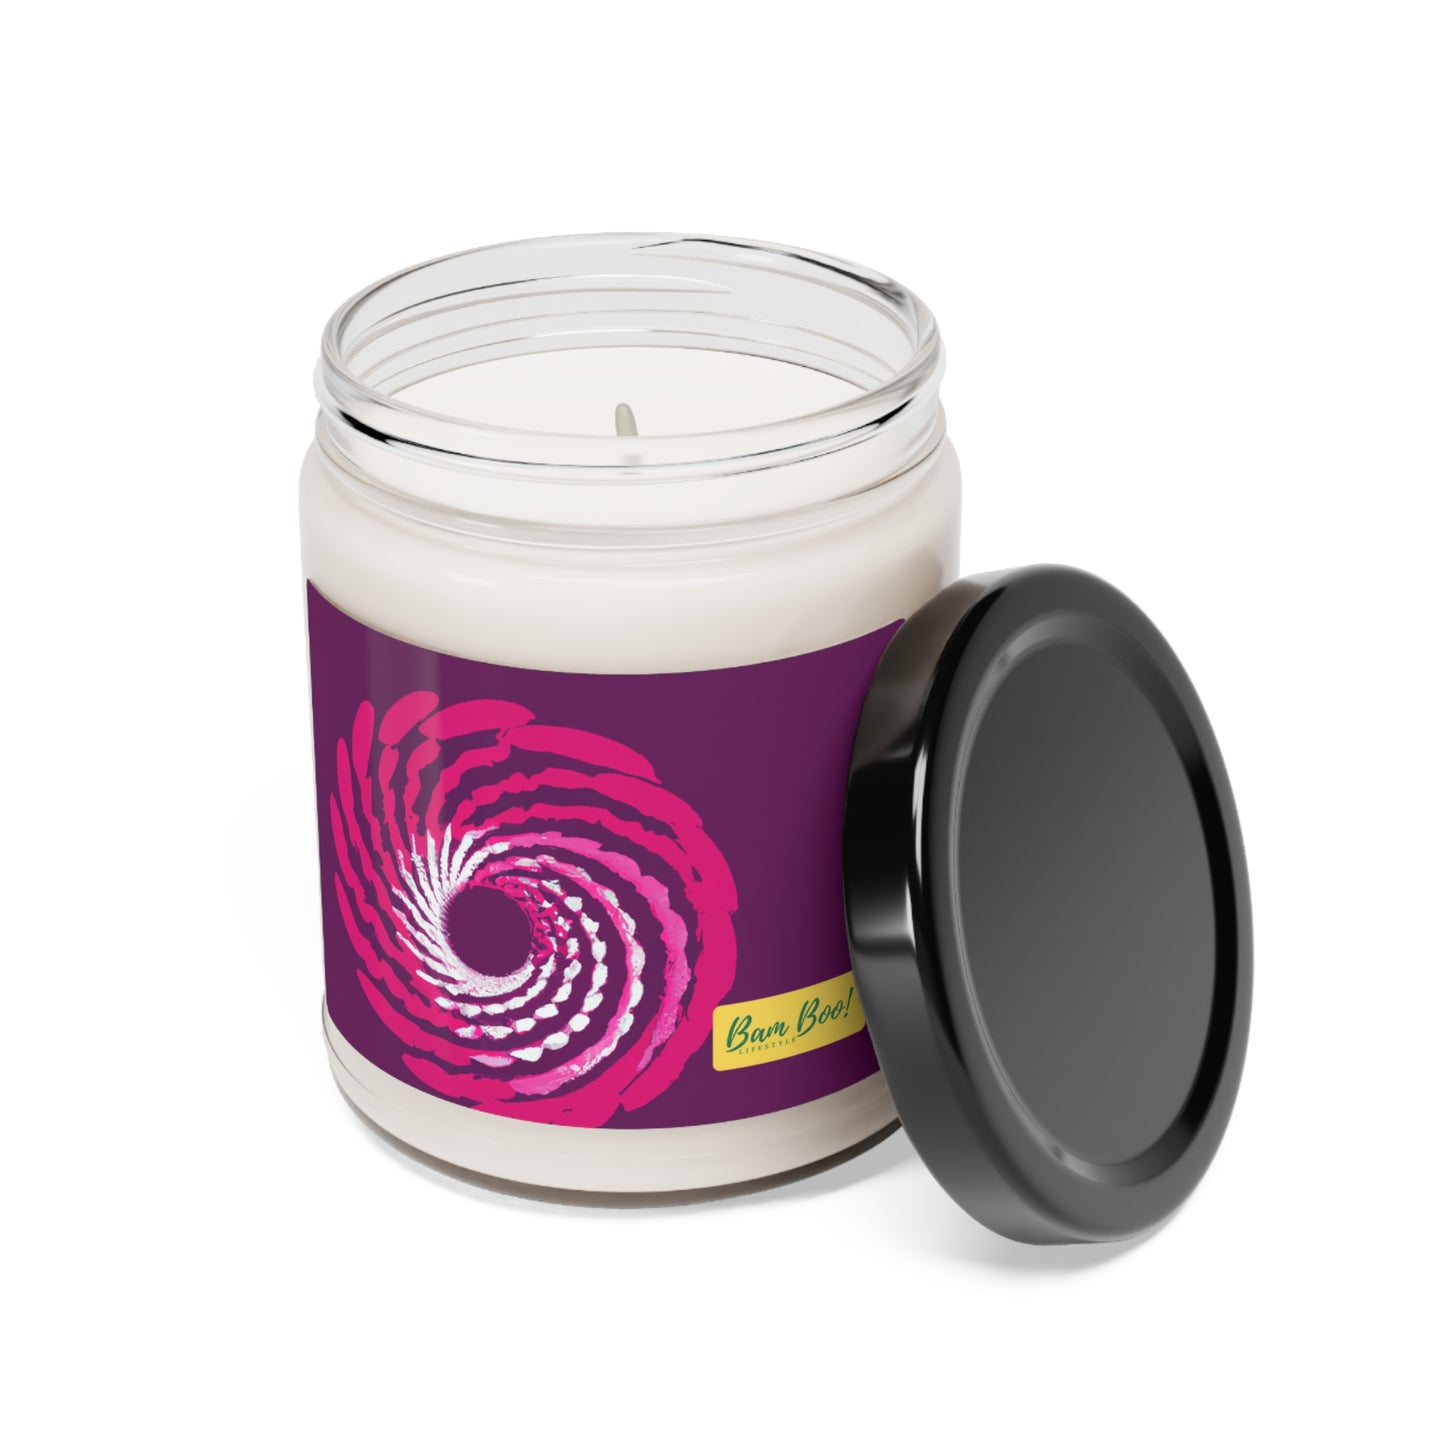 "Fusion of Art and Technology: A Hybrid Artistic Experience" - Bam Boo! Lifestyle Eco-friendly Soy Candle